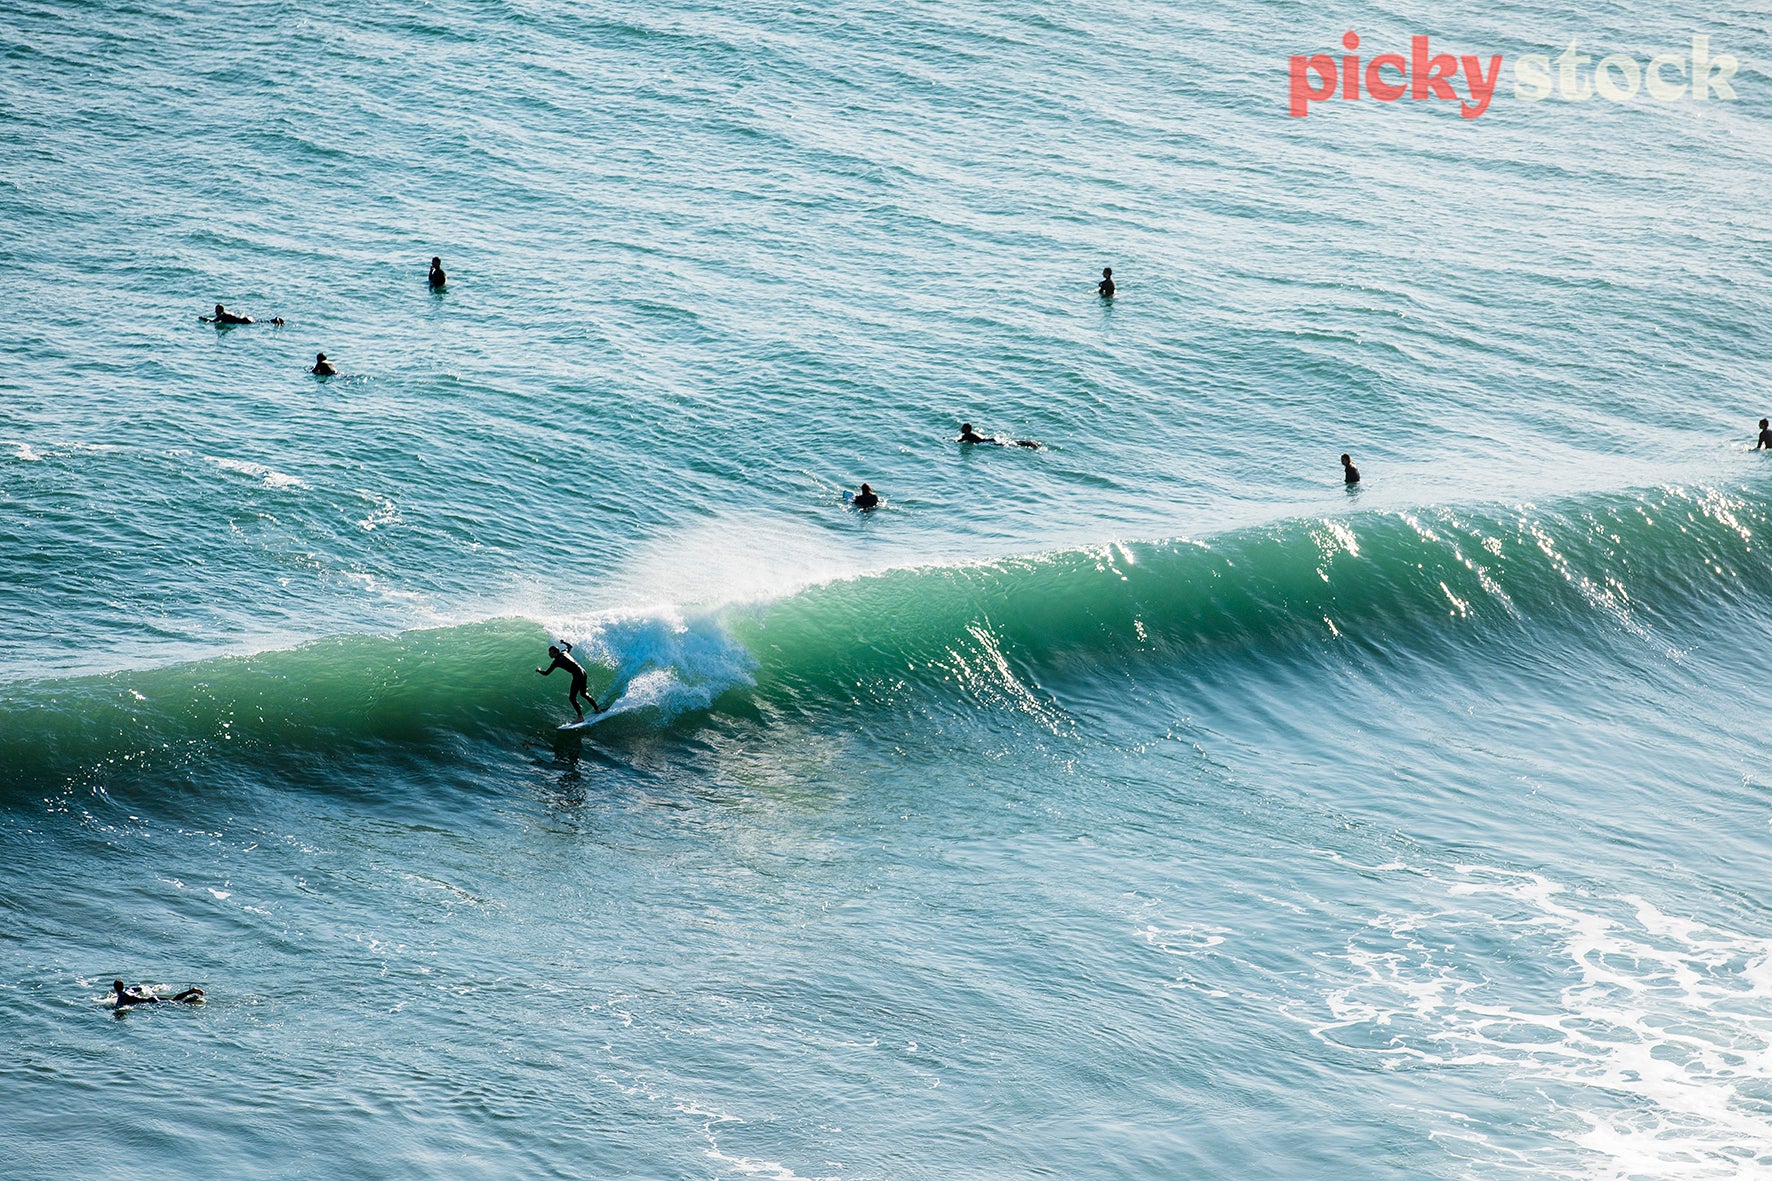 Surfer rides the green waves at Piha, seen from high angle. 